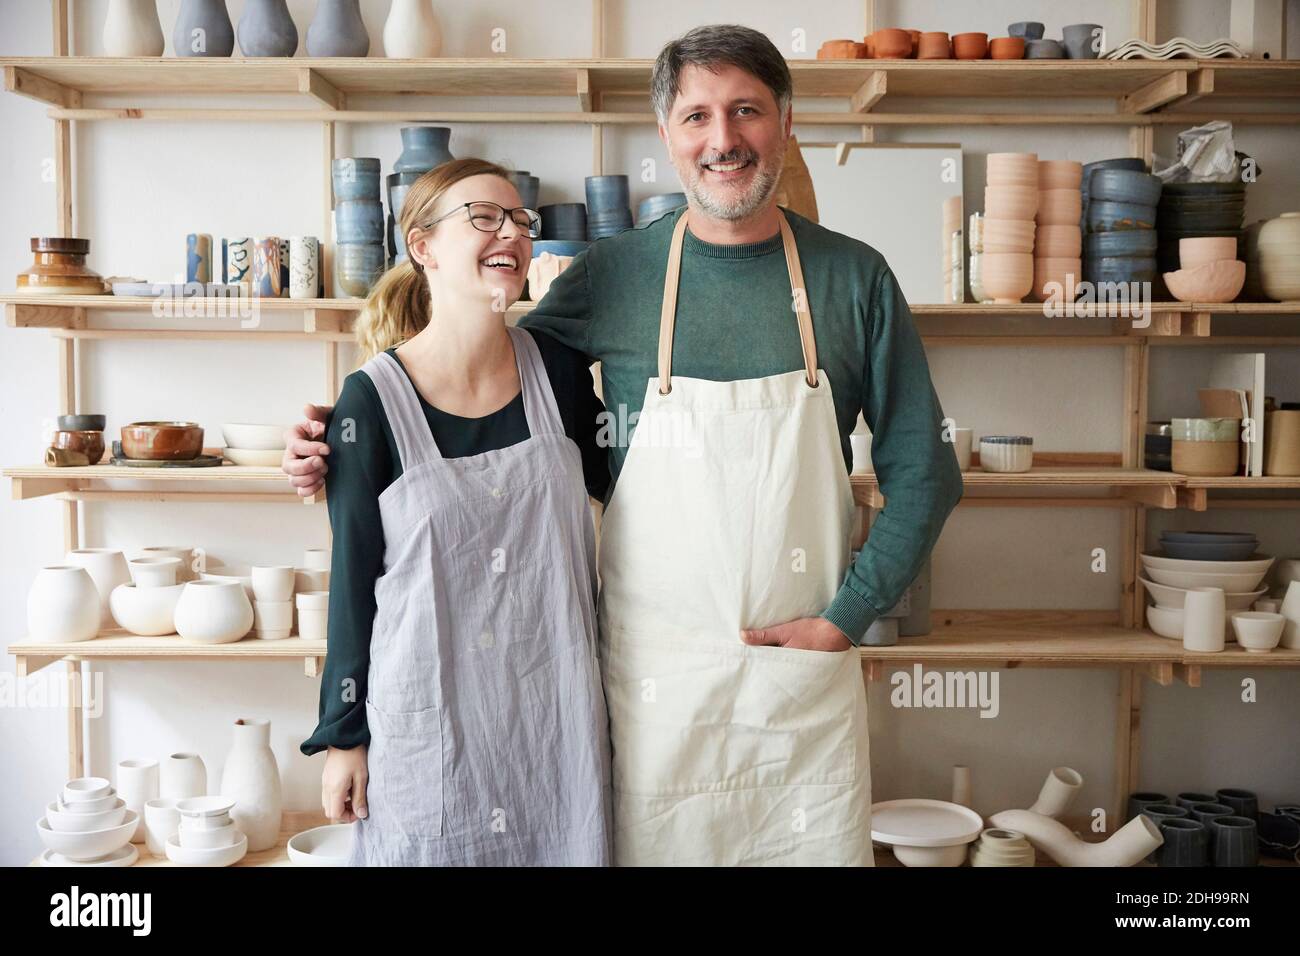 Smiling male and female coworkers in art studio Stock Photo